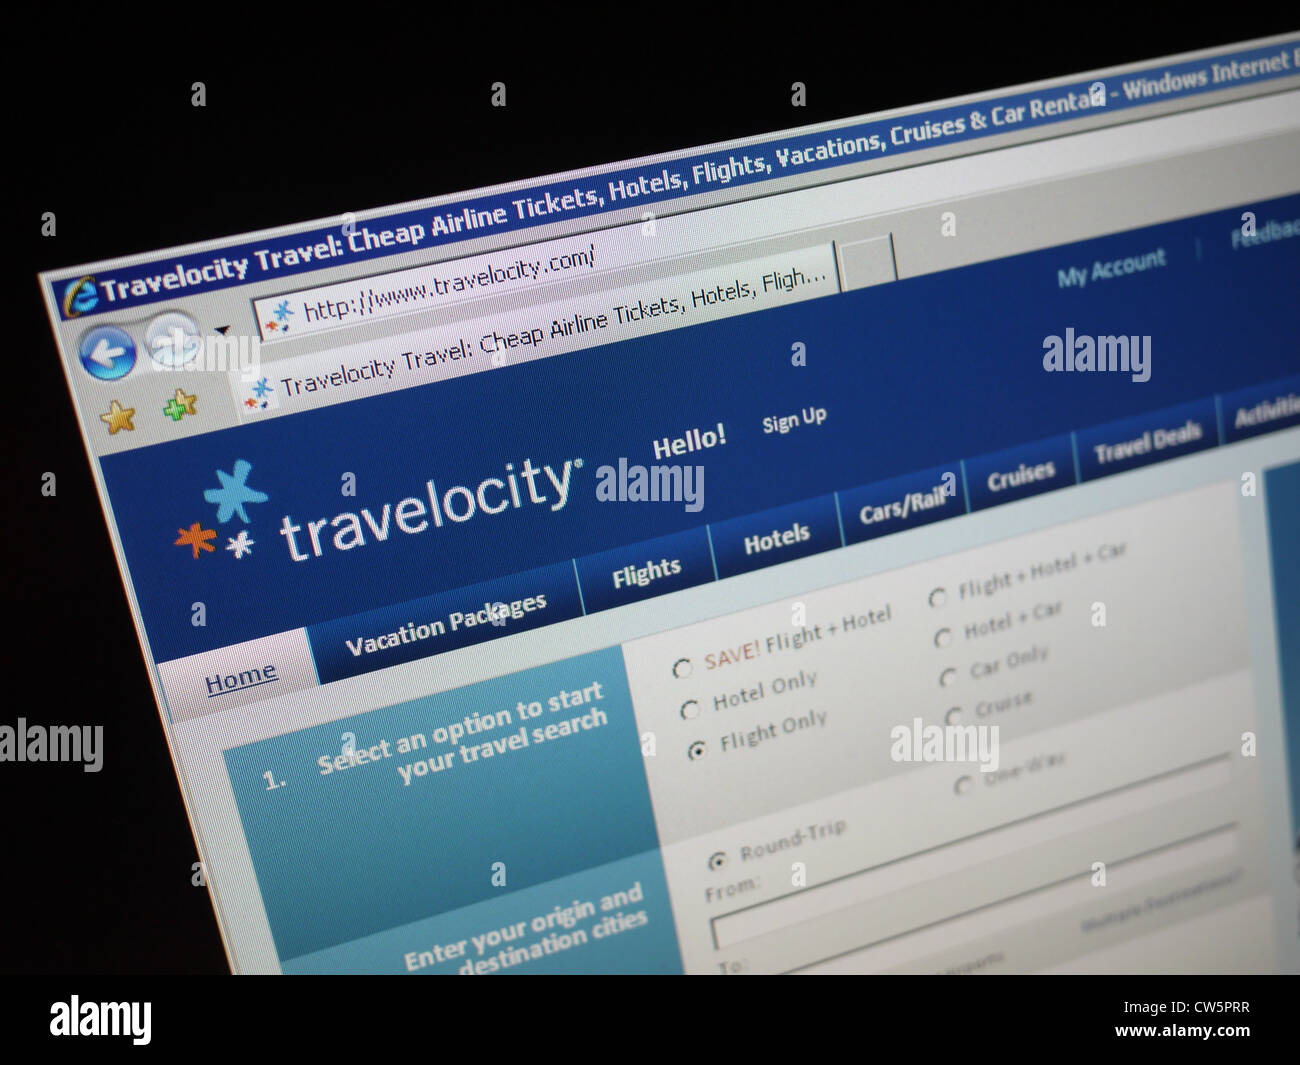 The Guide to Finding Affordable Flight Deals on Travelocity.com